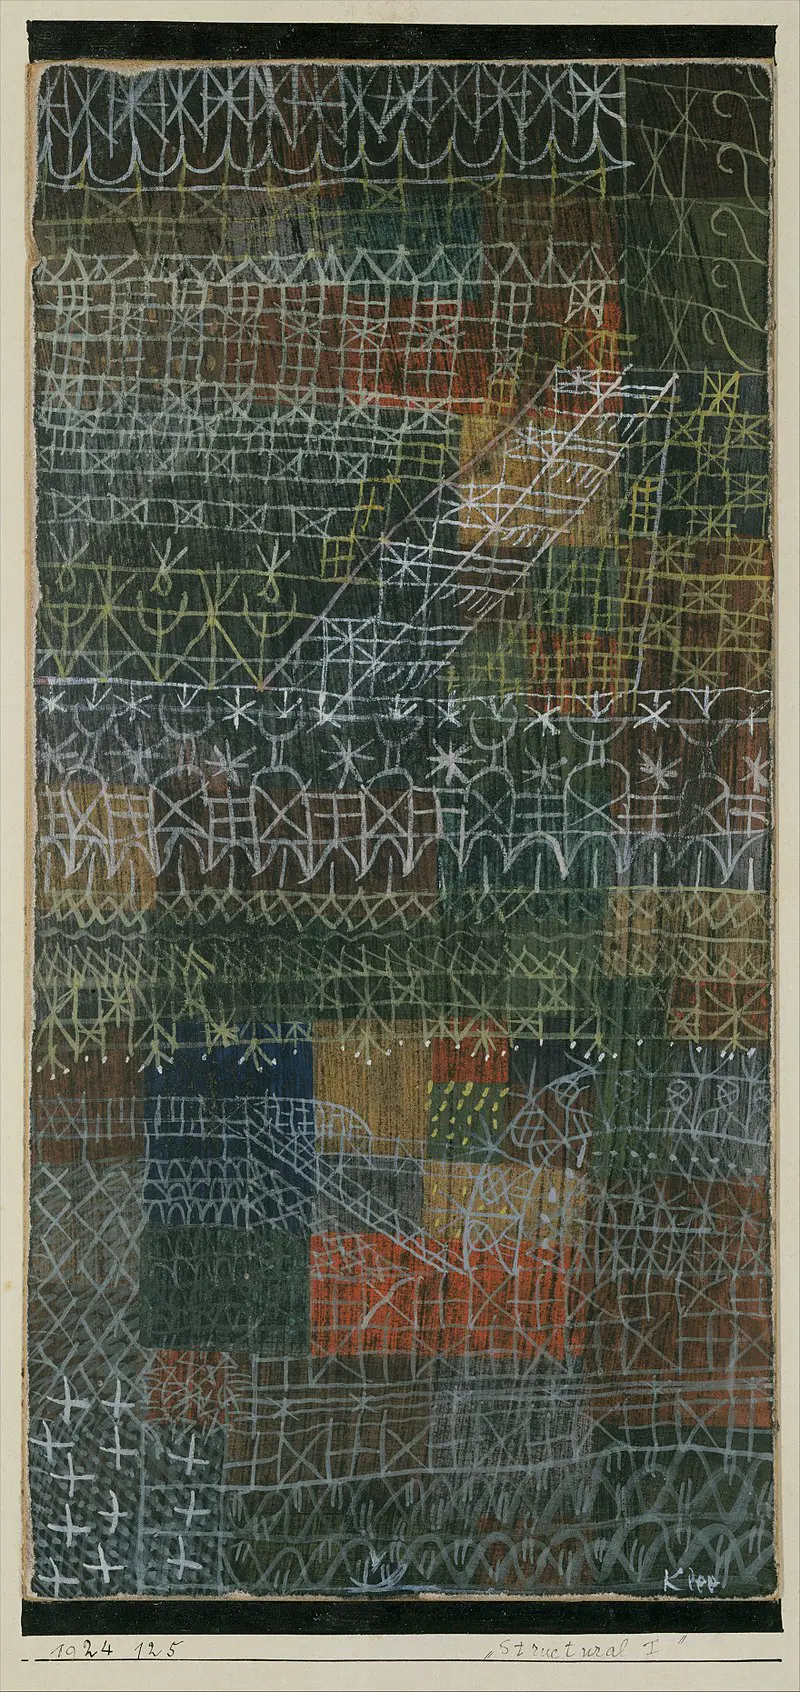 Structural I Paul Klee